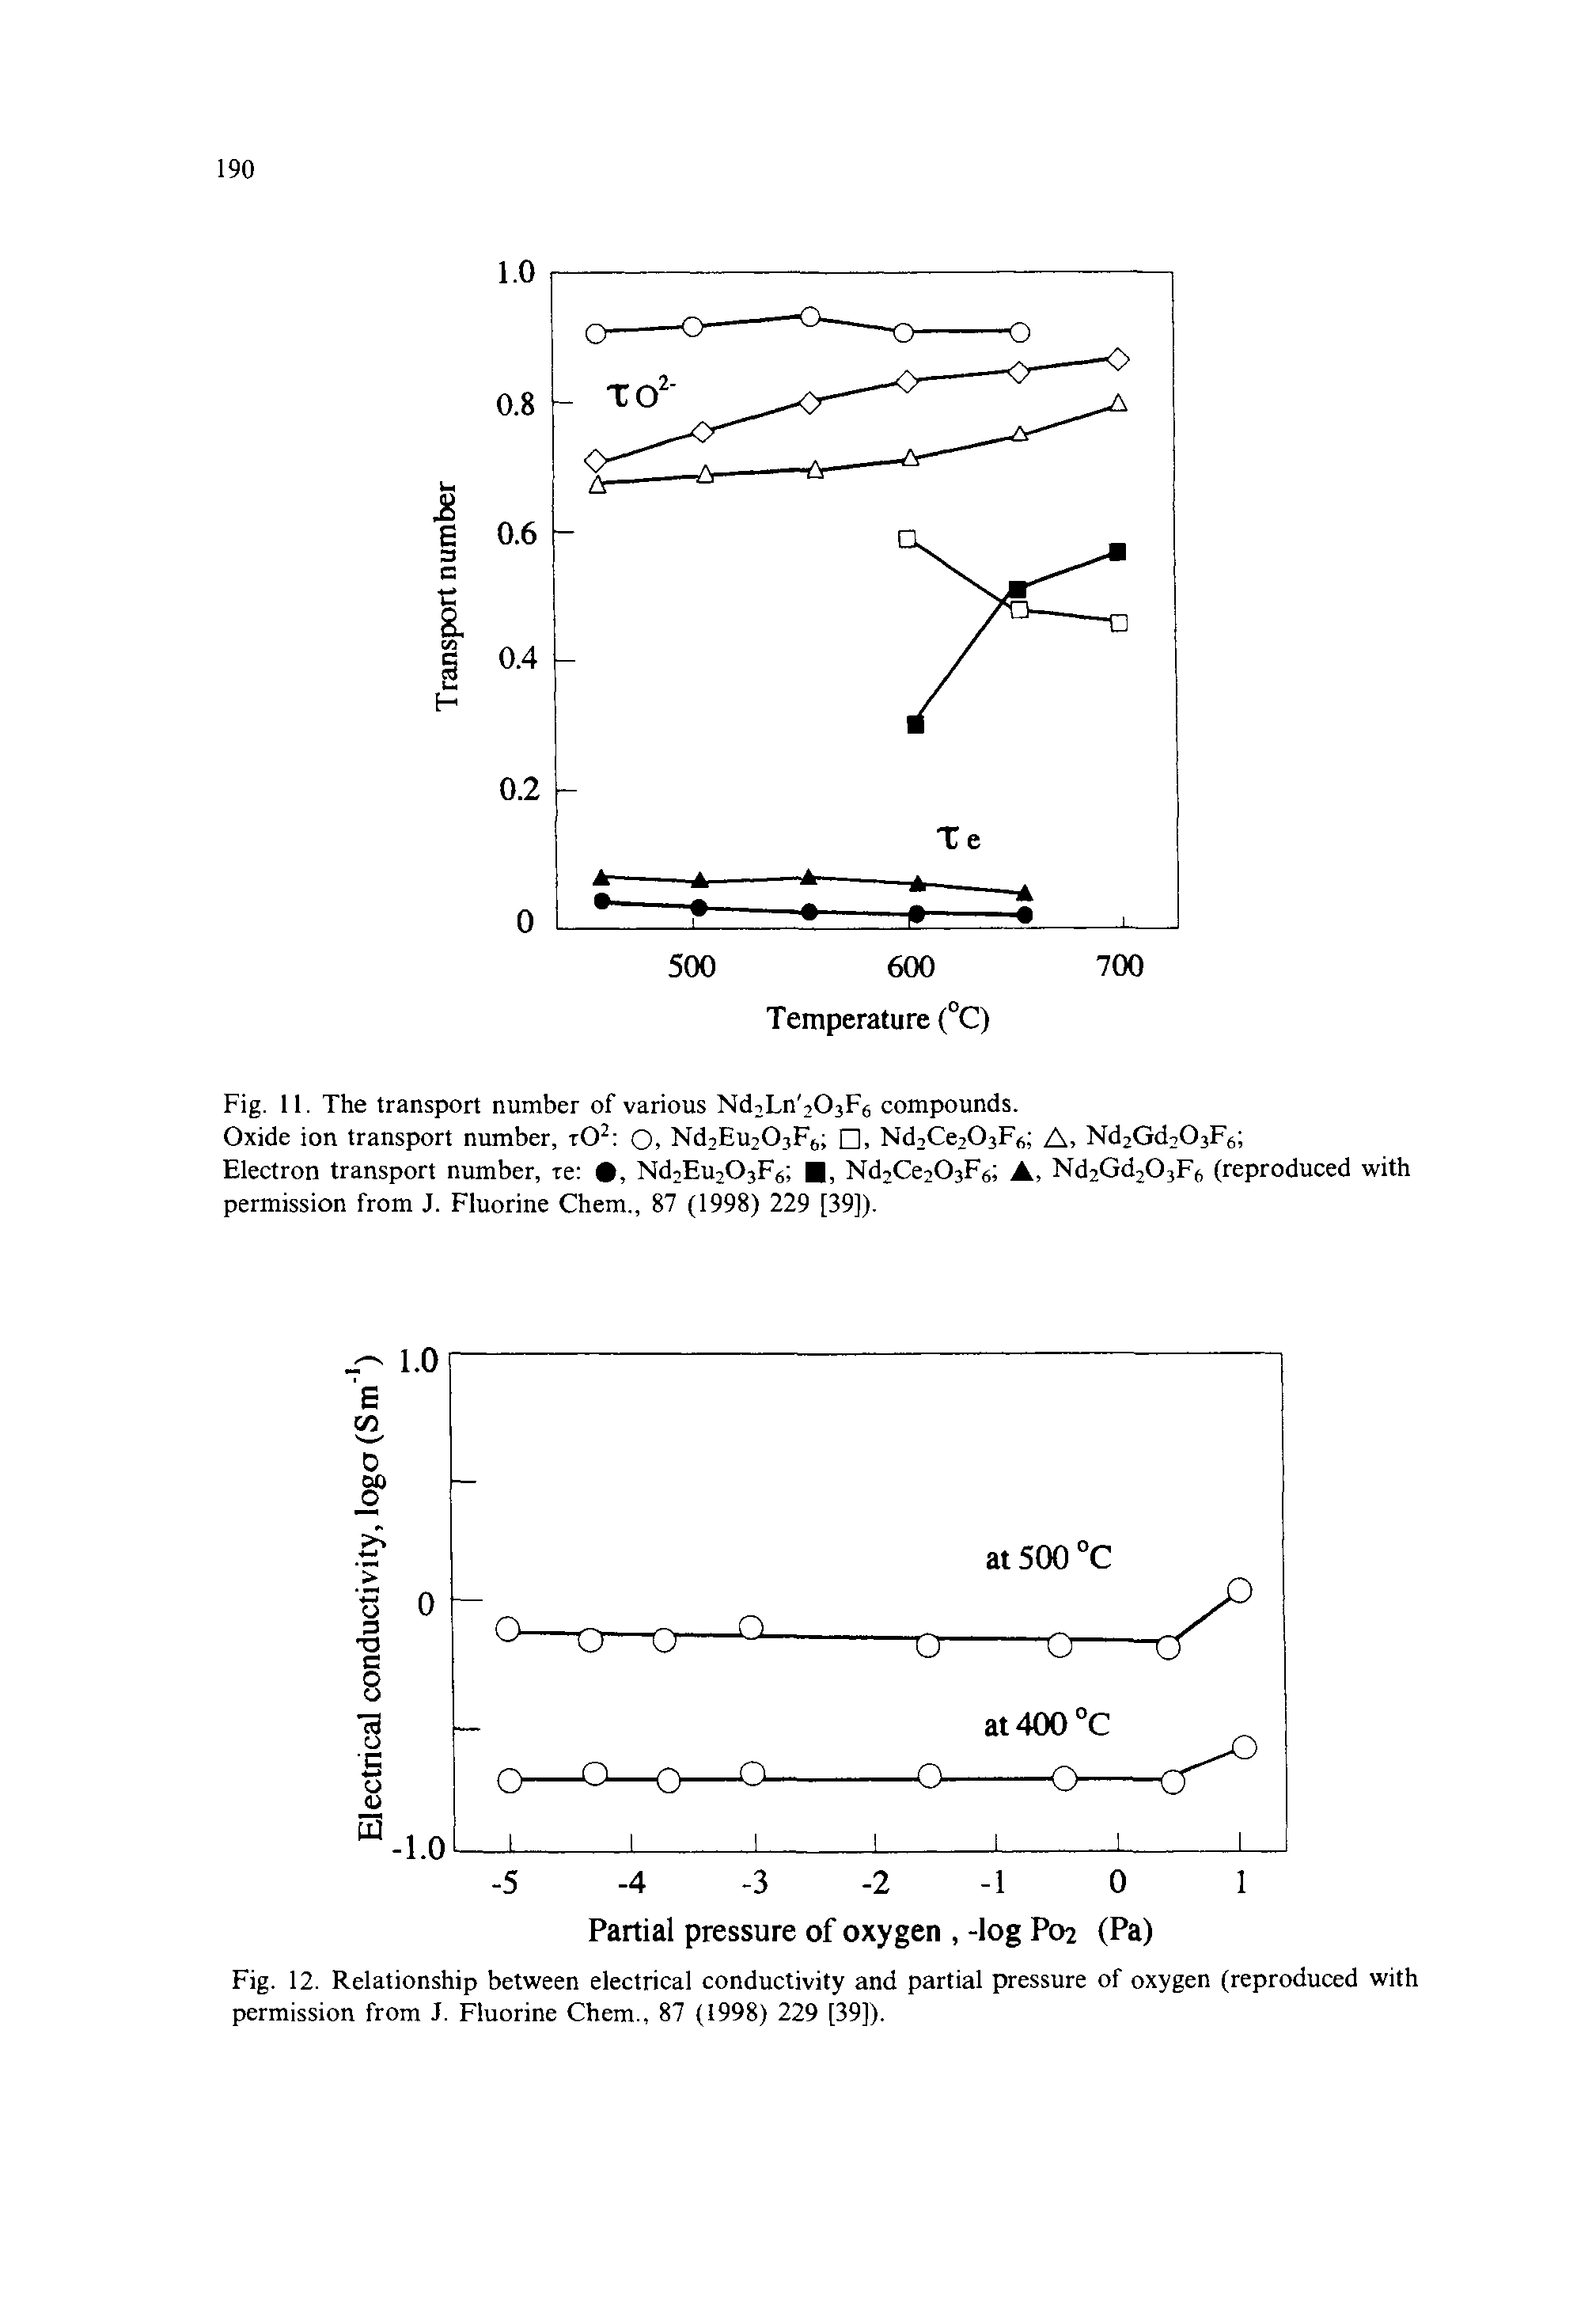 Fig. 12. Relationship between electrical conductivity and partial pressure of oxygen (reproduced with permission from J. Fluorine Chem., 87 (1998) 229 [39]).